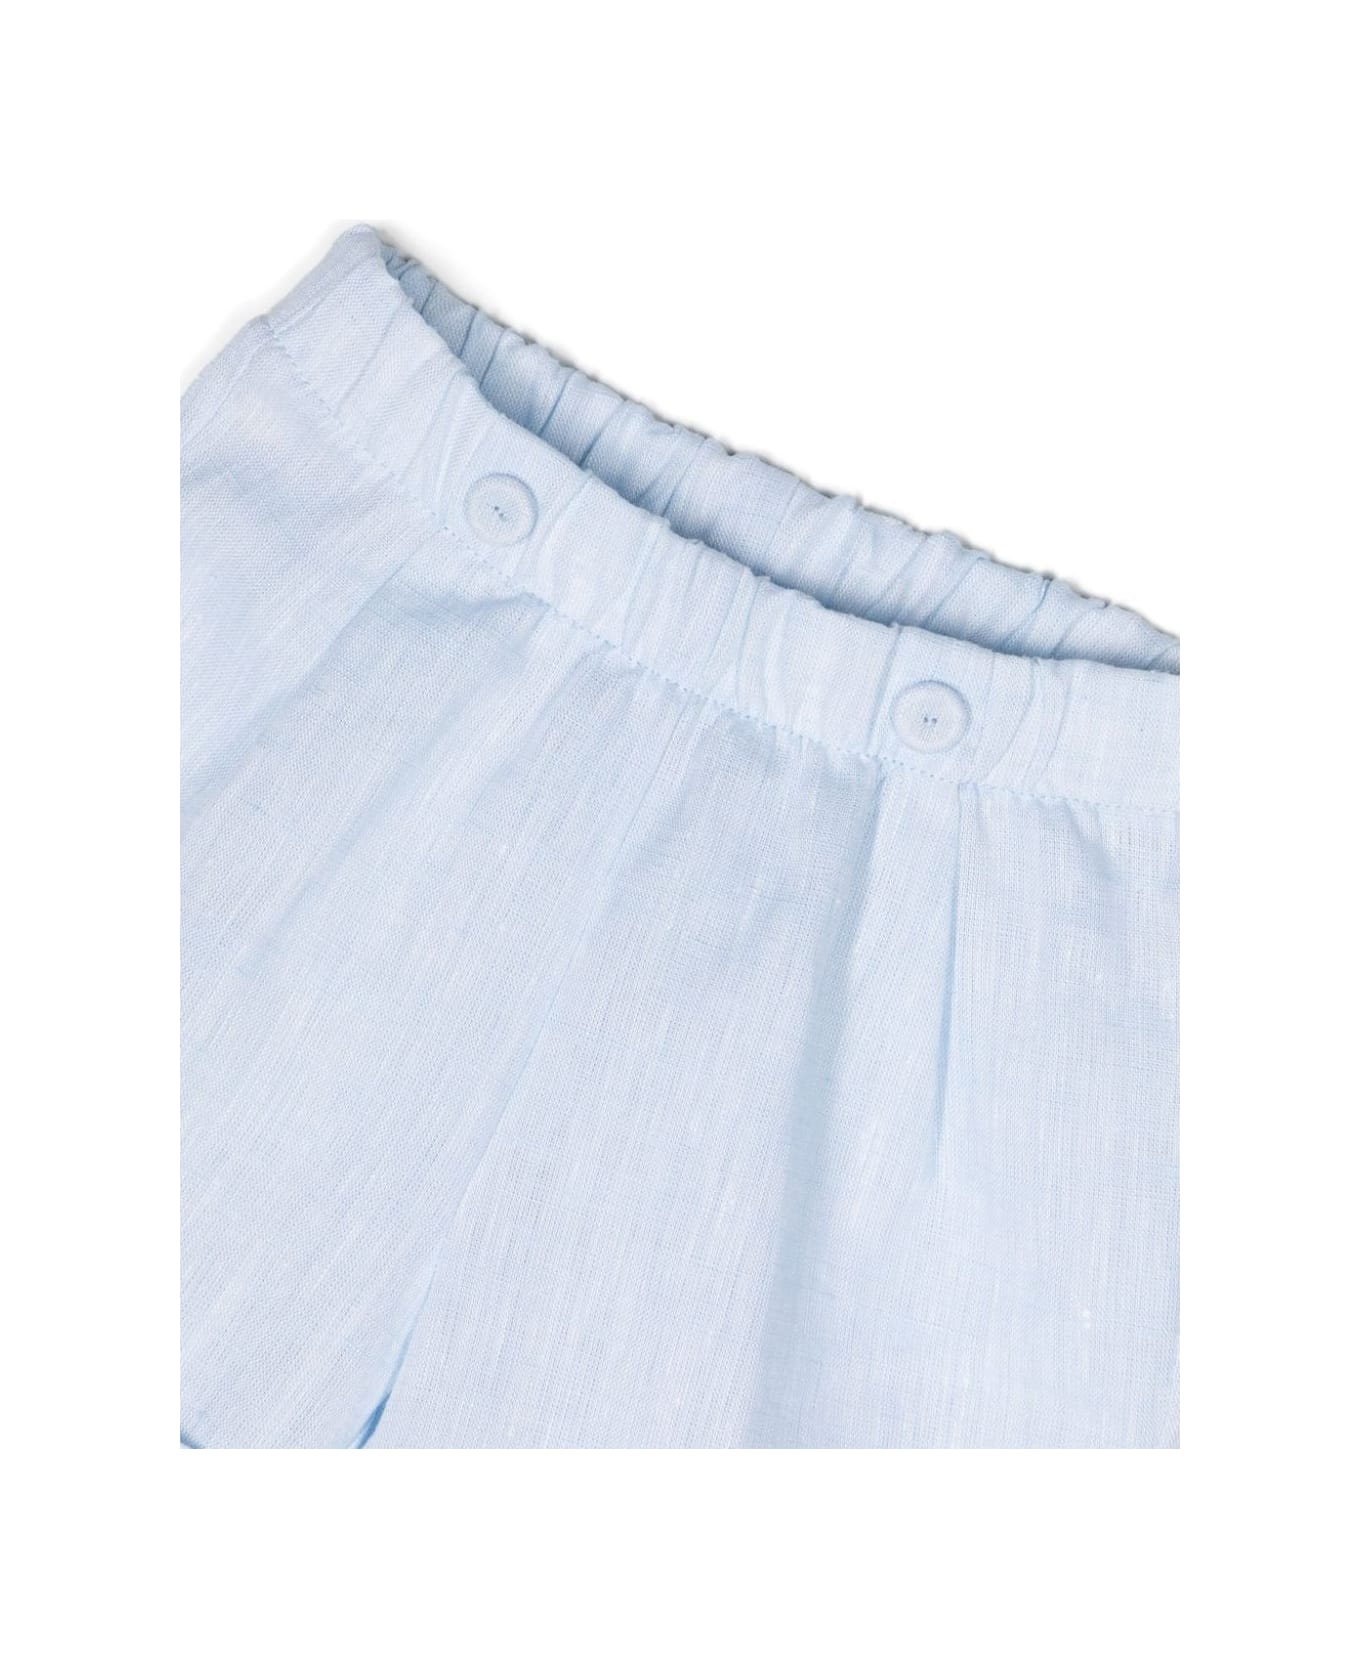 Il Gufo Two Piece Linen Set In White And Light Blue - Blue